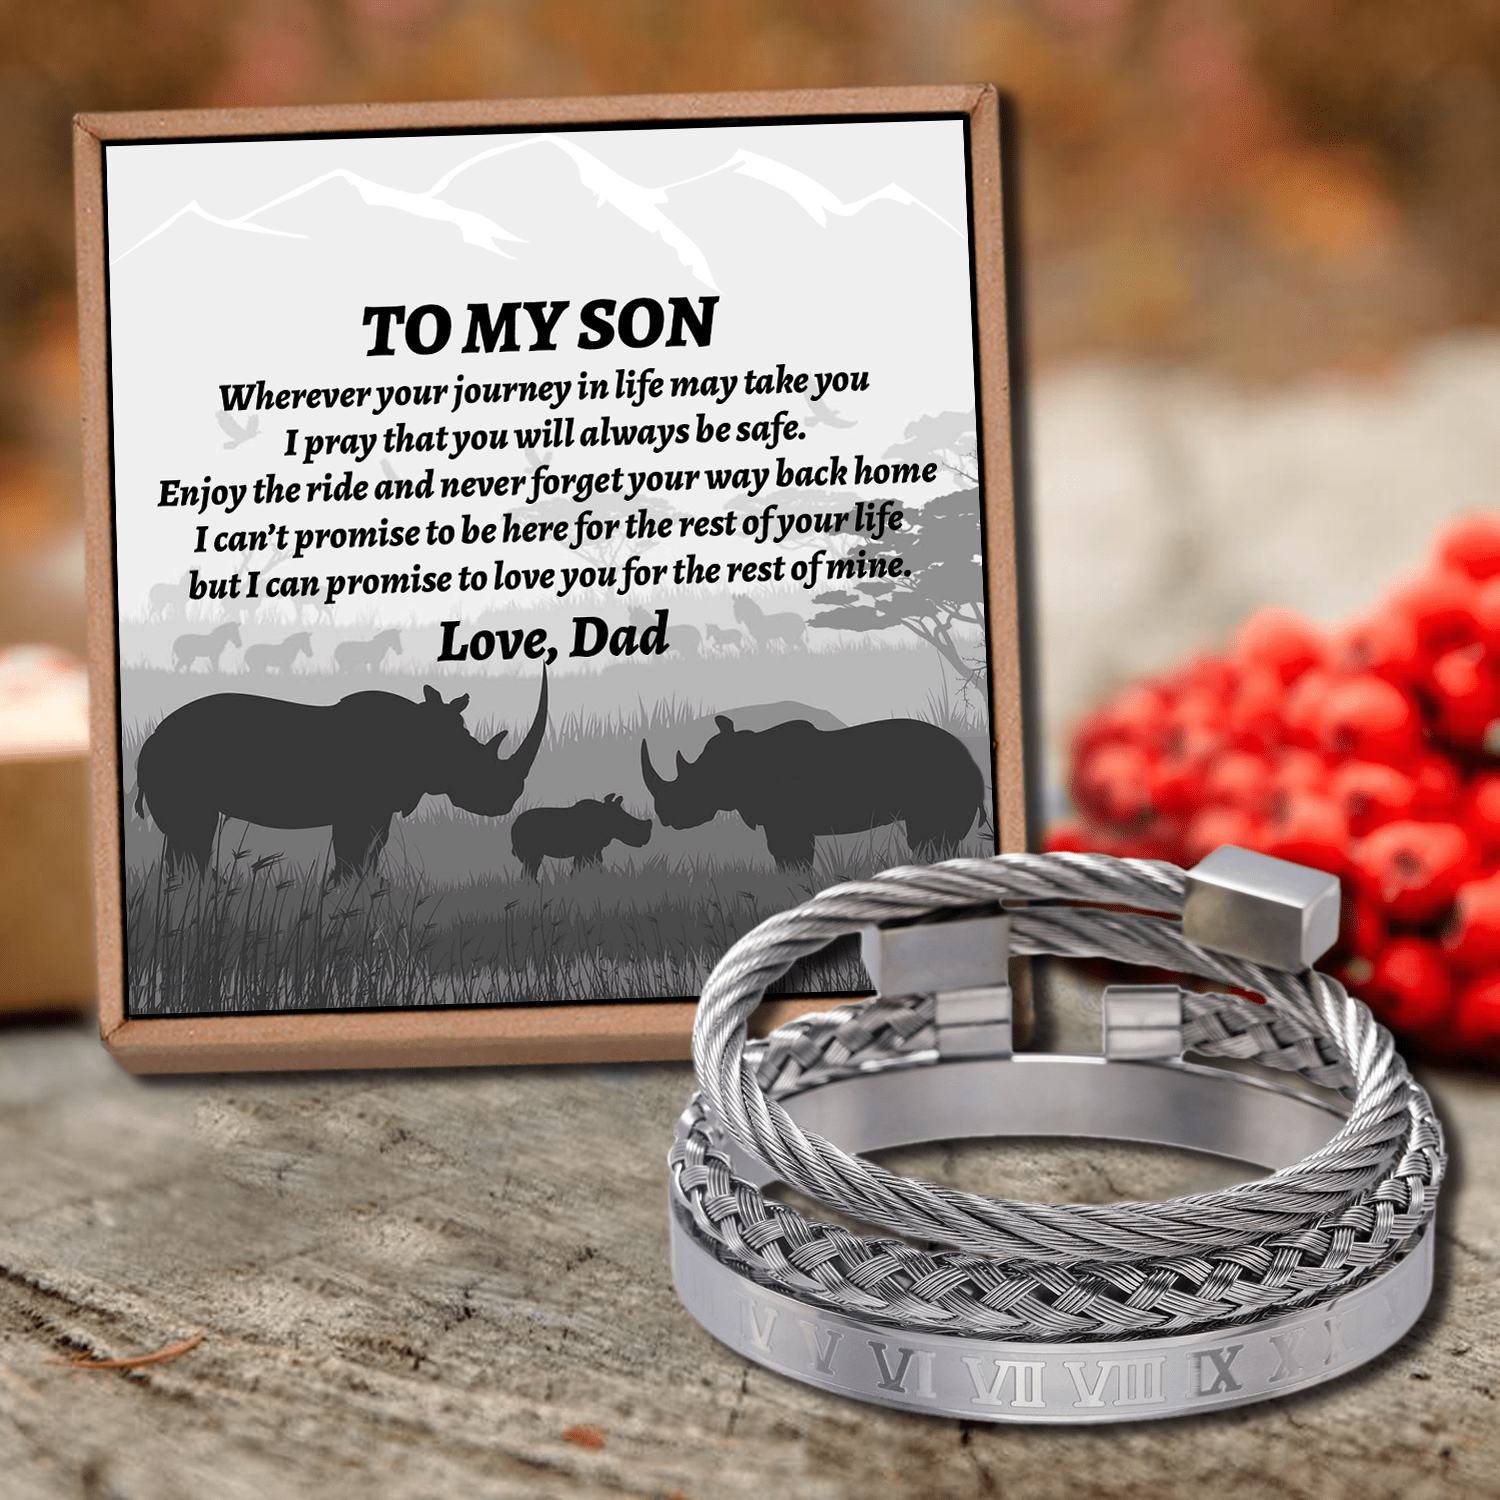 Bracelets Dad To Son - I Promise To Love You Roman Numeral Bangle Weave Bracelets Set GiveMe-Gifts